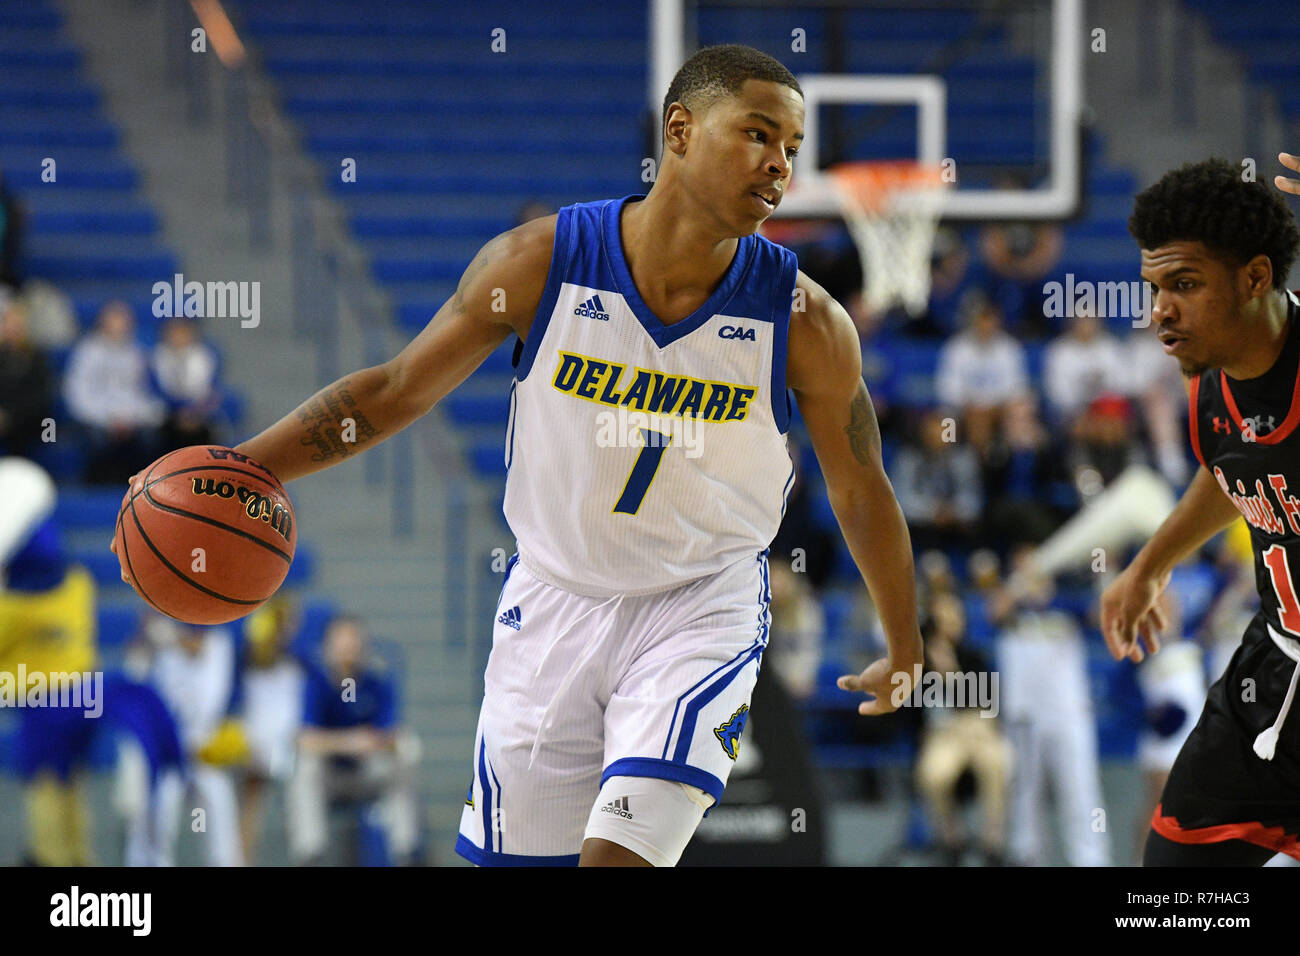 Newark, Delaware, USA. 9th Dec, 2018. Delaware Fightin Blue Hens guard  KEVIN ANDERSON (1) shown during the basketball game played at the Bob  Carpenter Center in Newark, DE. The Blue Hens beat